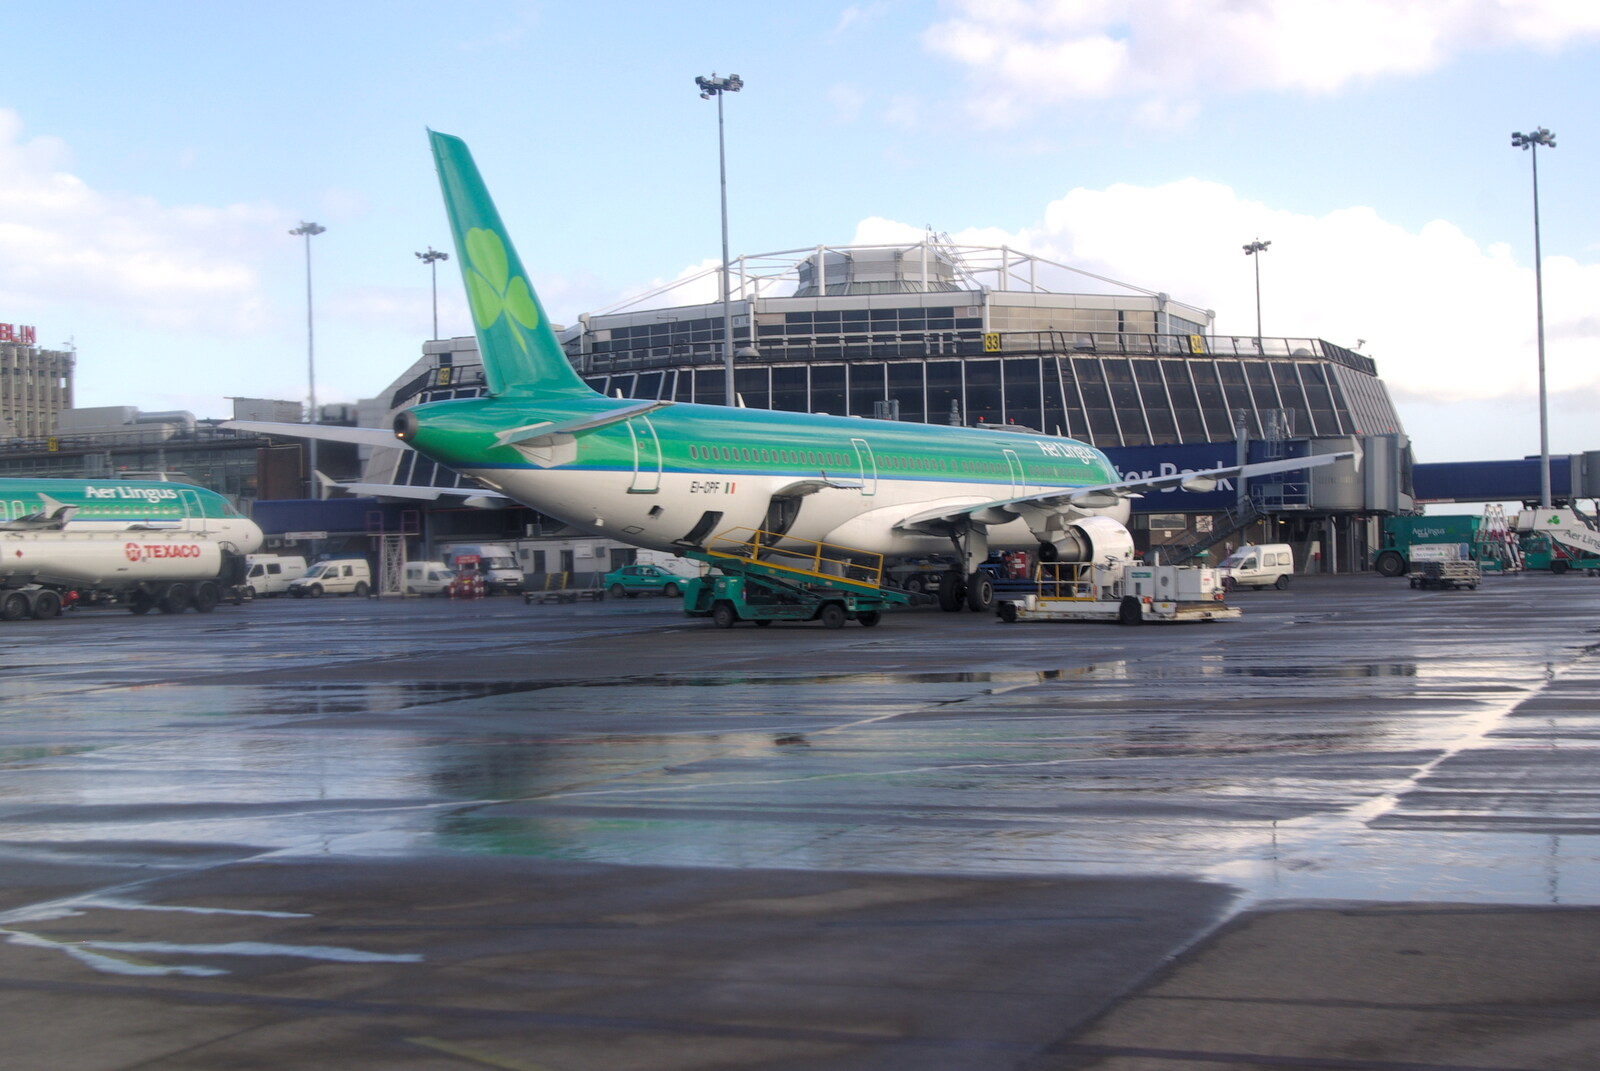 Easter in Dublin, Ireland - 21st March 2008: An Aer Lingus 737 on the ground at Dublin